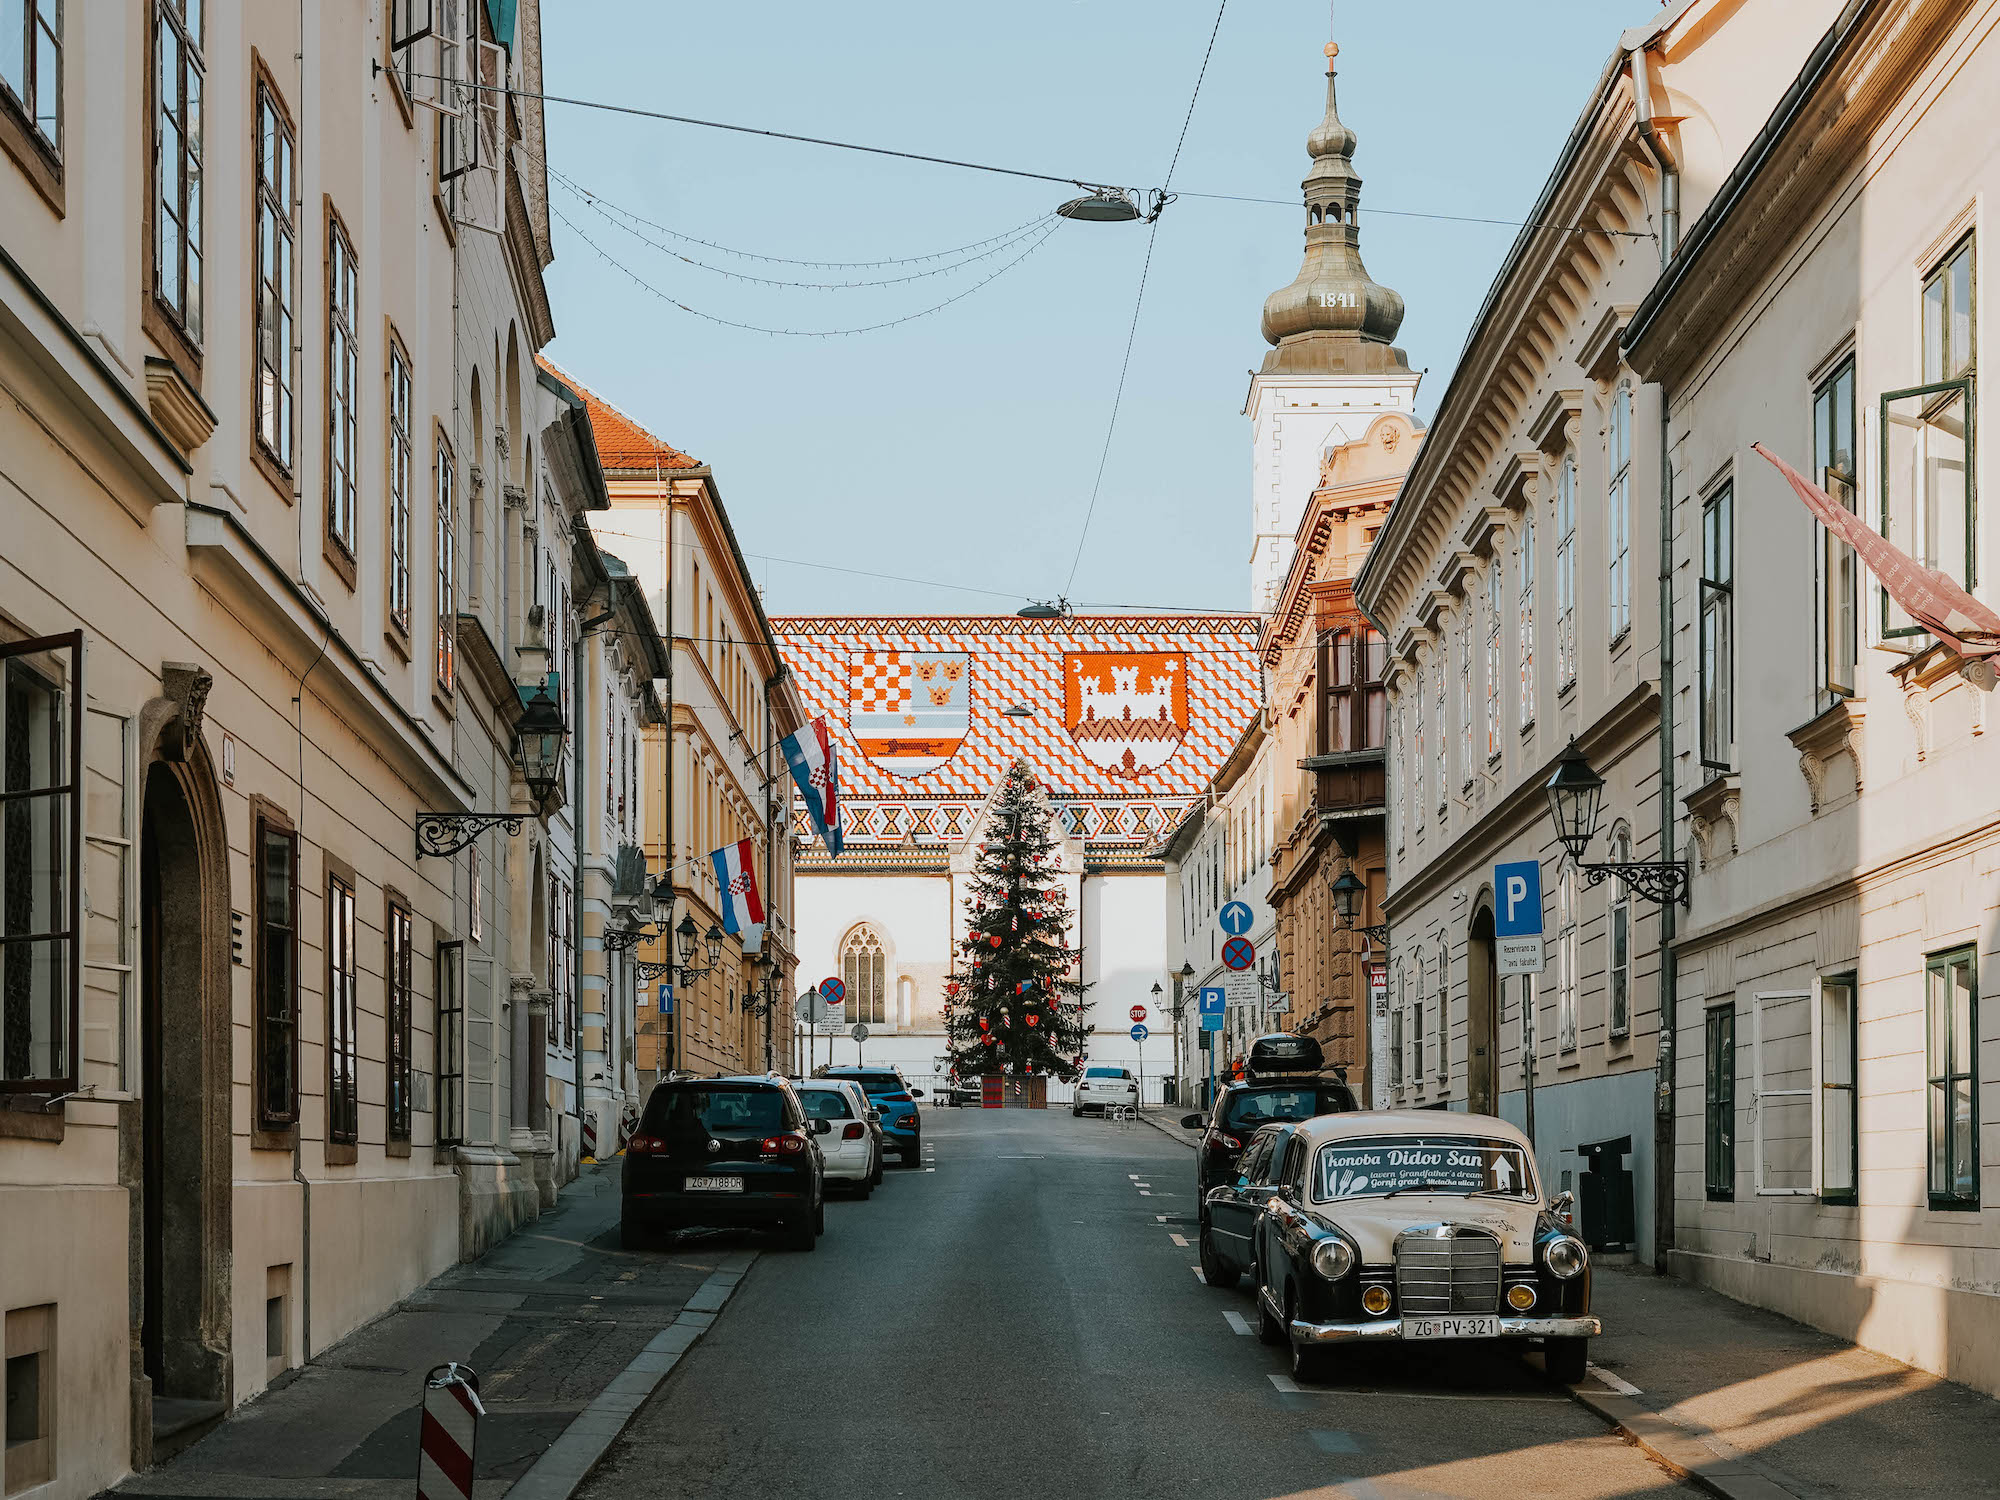 The upper town is the older part of Zagreb, Croatia